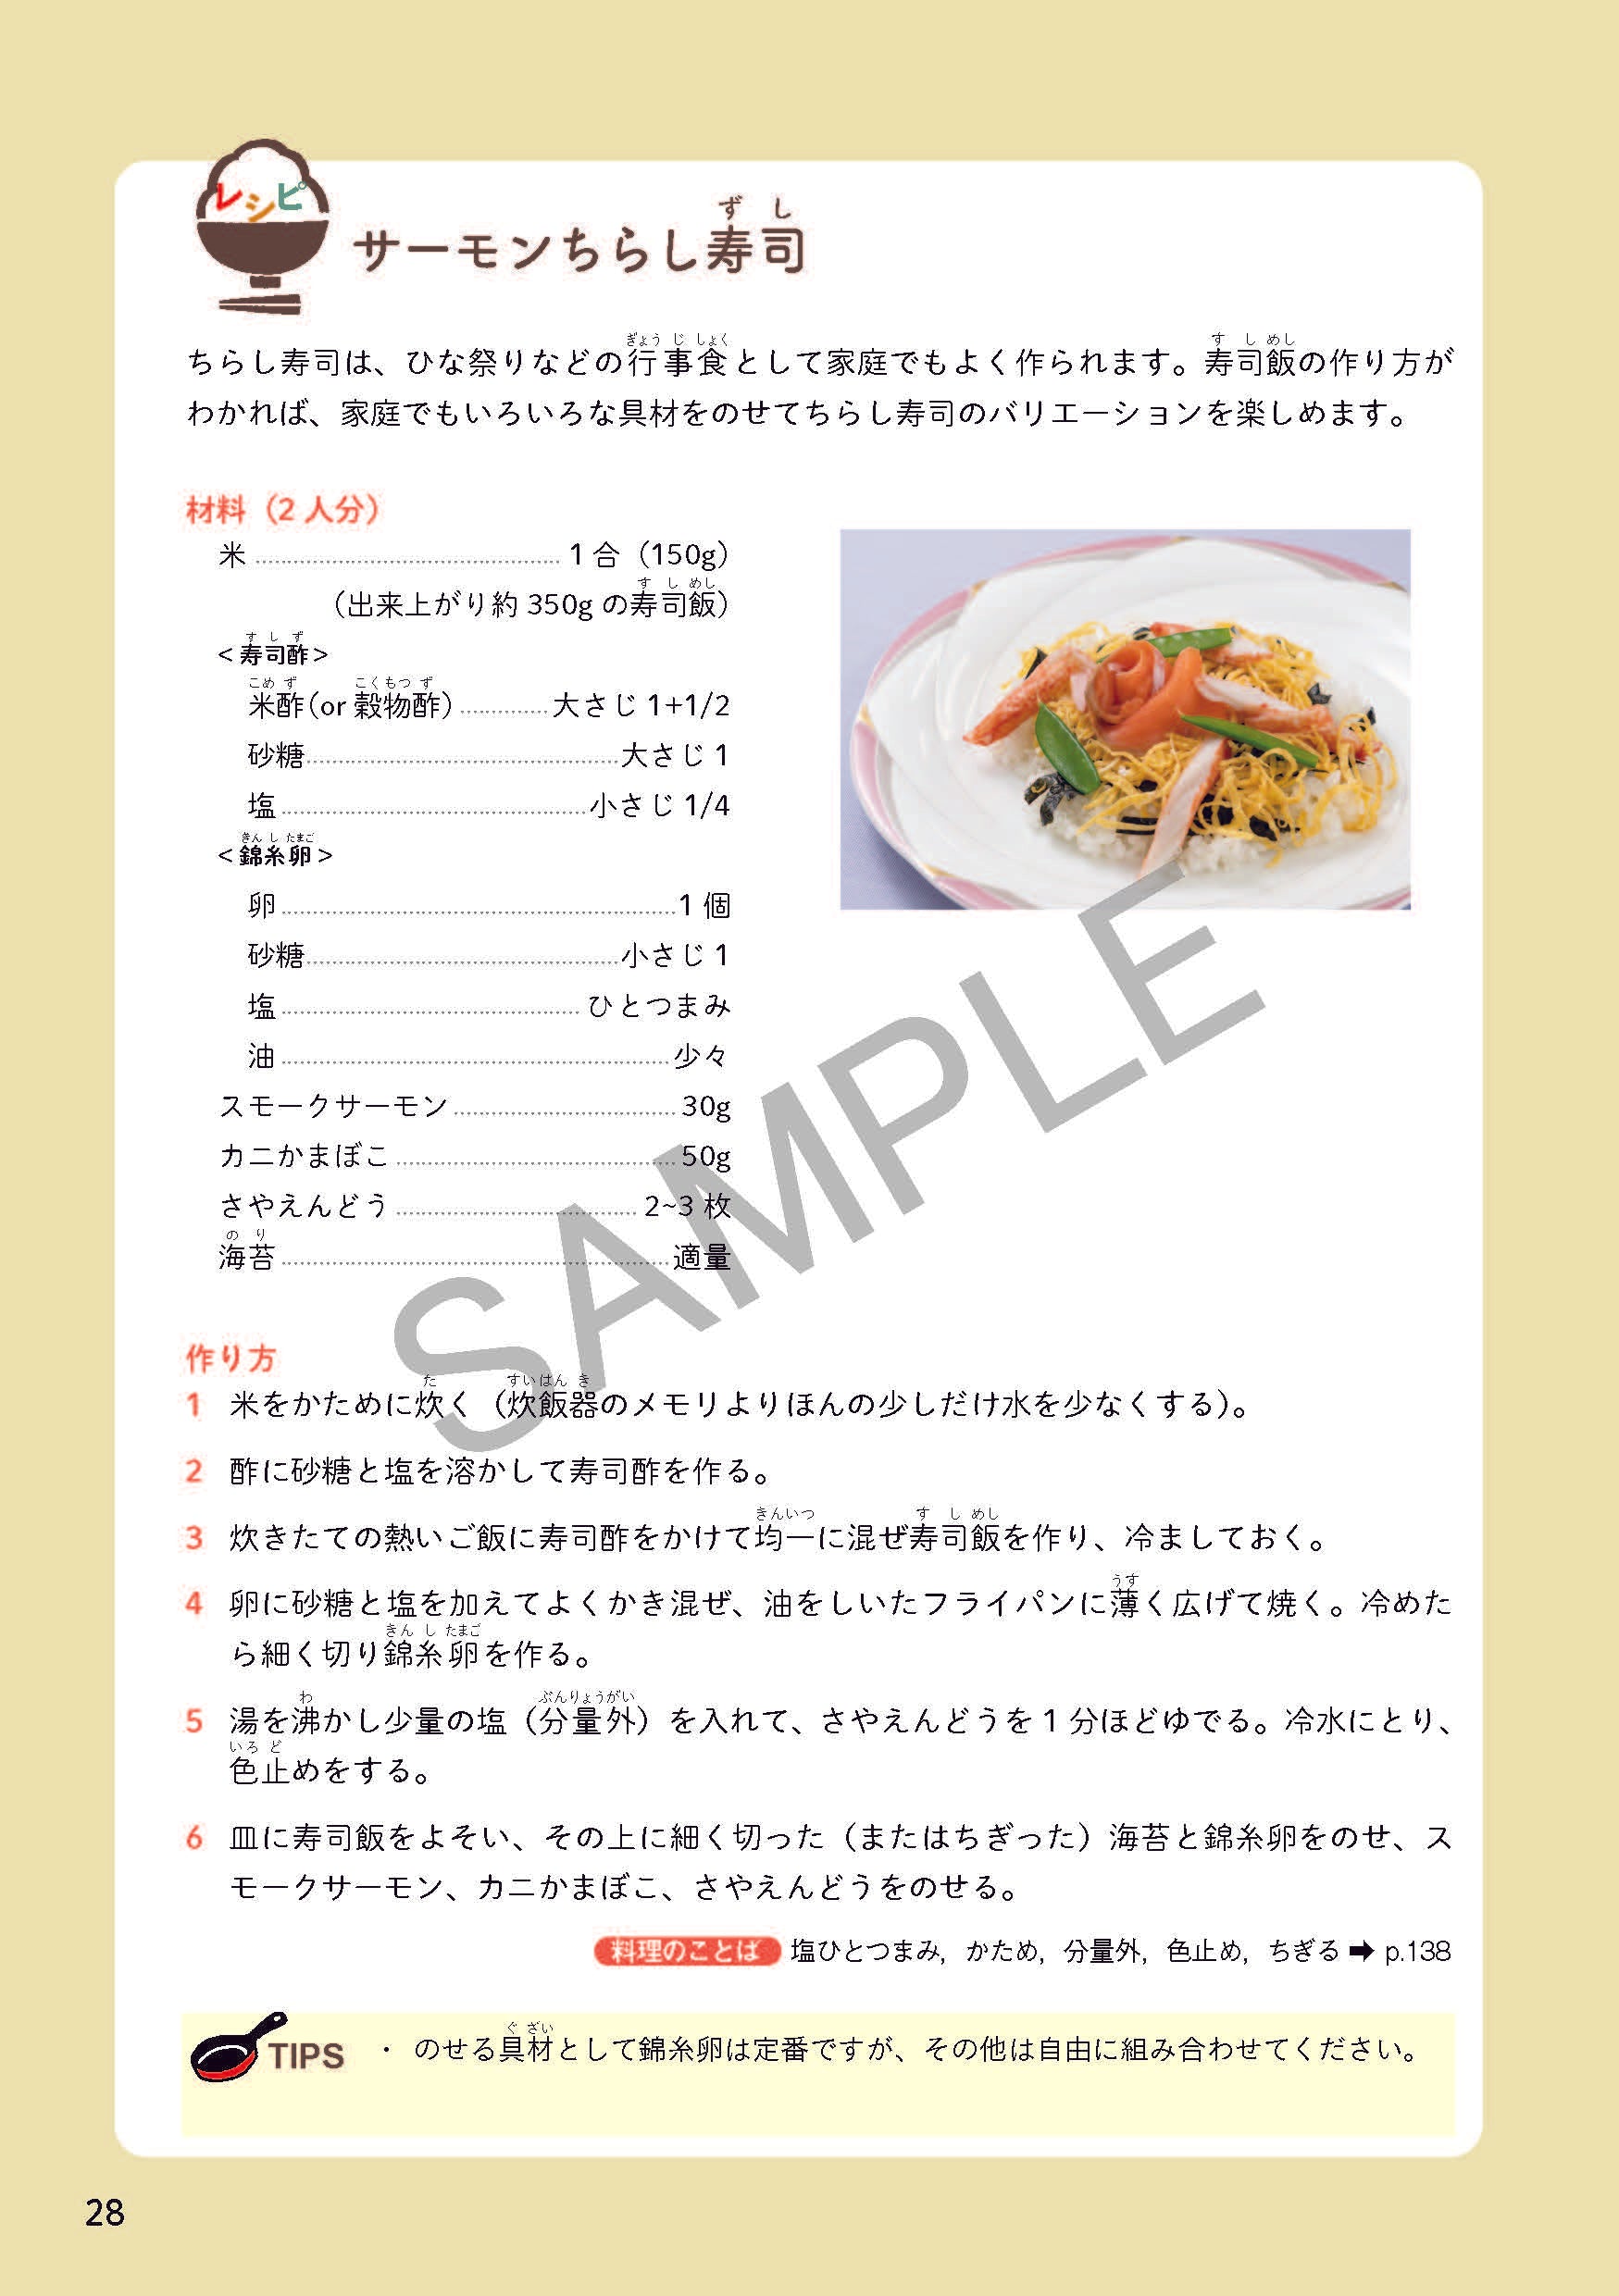 Meshiagare - A Culinary Journey Through Advanced Japanese - Sample Page 12